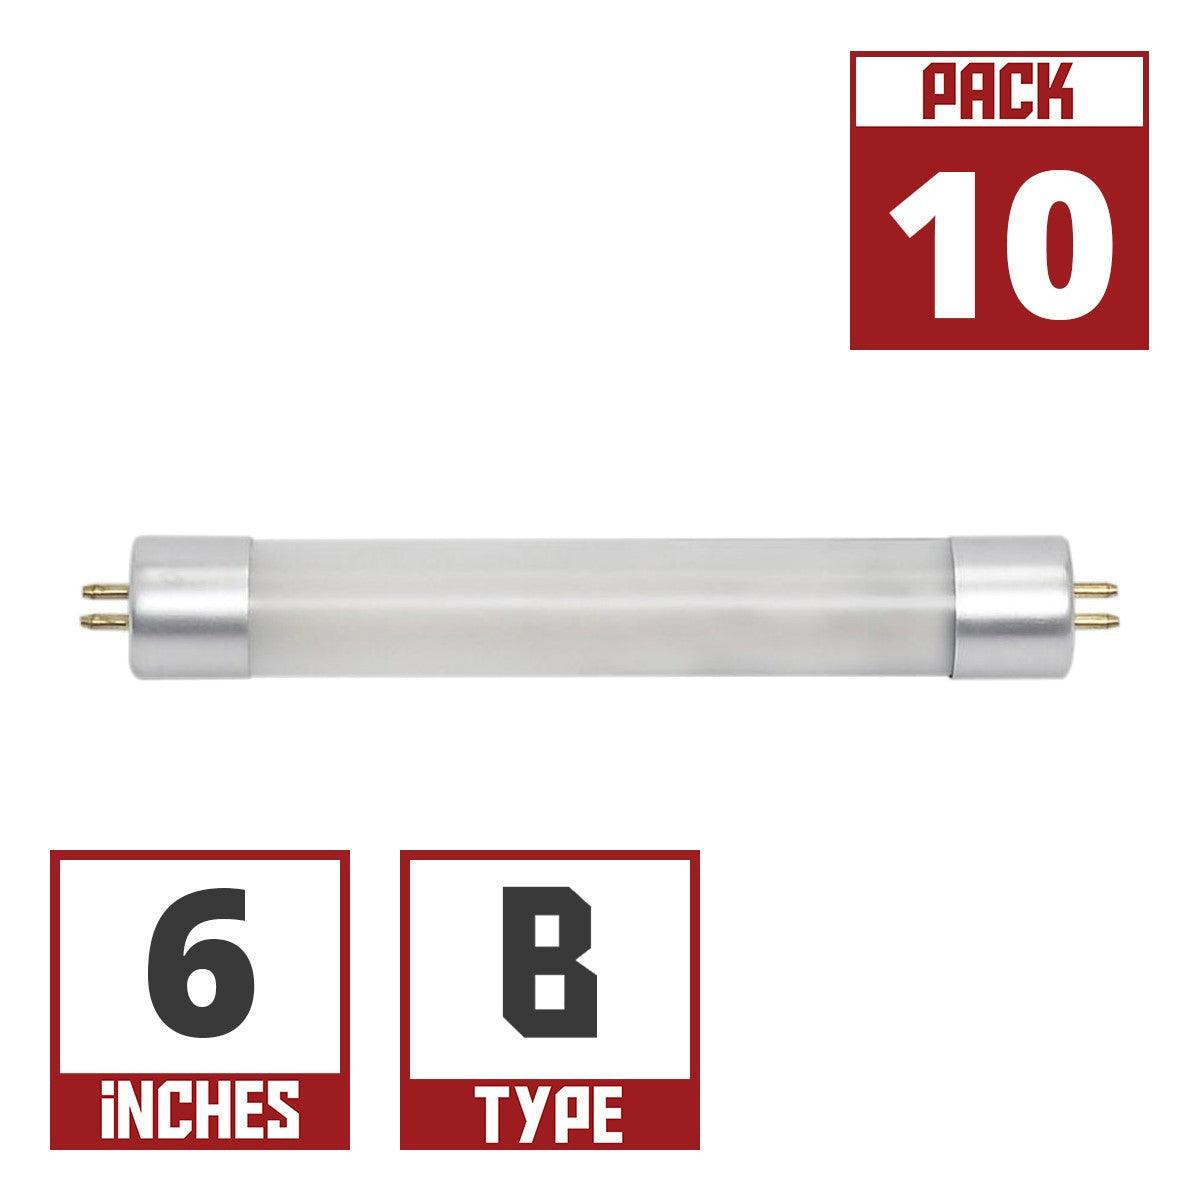 6 Inch LED mini T5 Tube, 2 Watt, 150 Lumens, 6500K, F4T5 Replacement, Ballast Bypass Double End, G5 Base (Case Of 10)